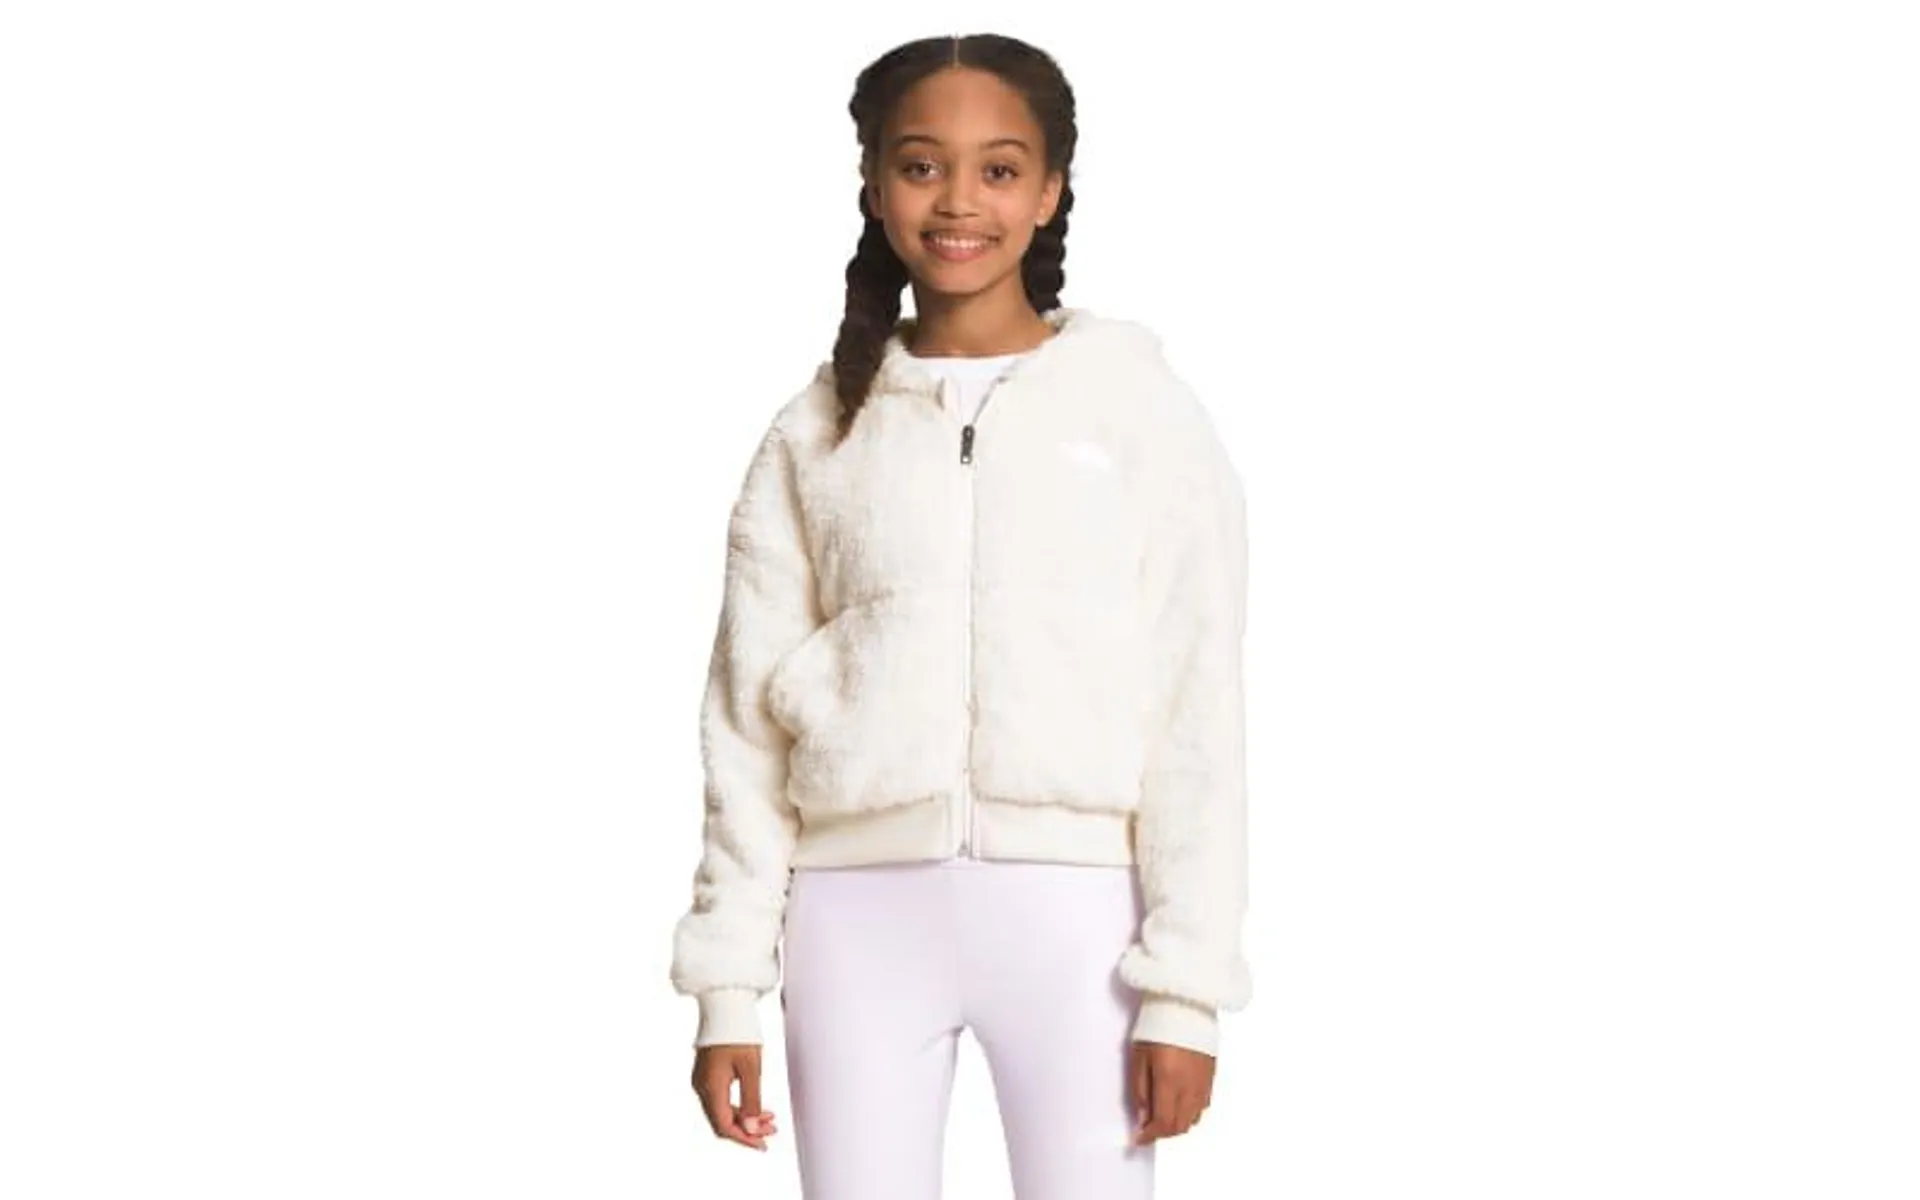 The North Face Suave Oso Full-Zip Hoodie for Girls